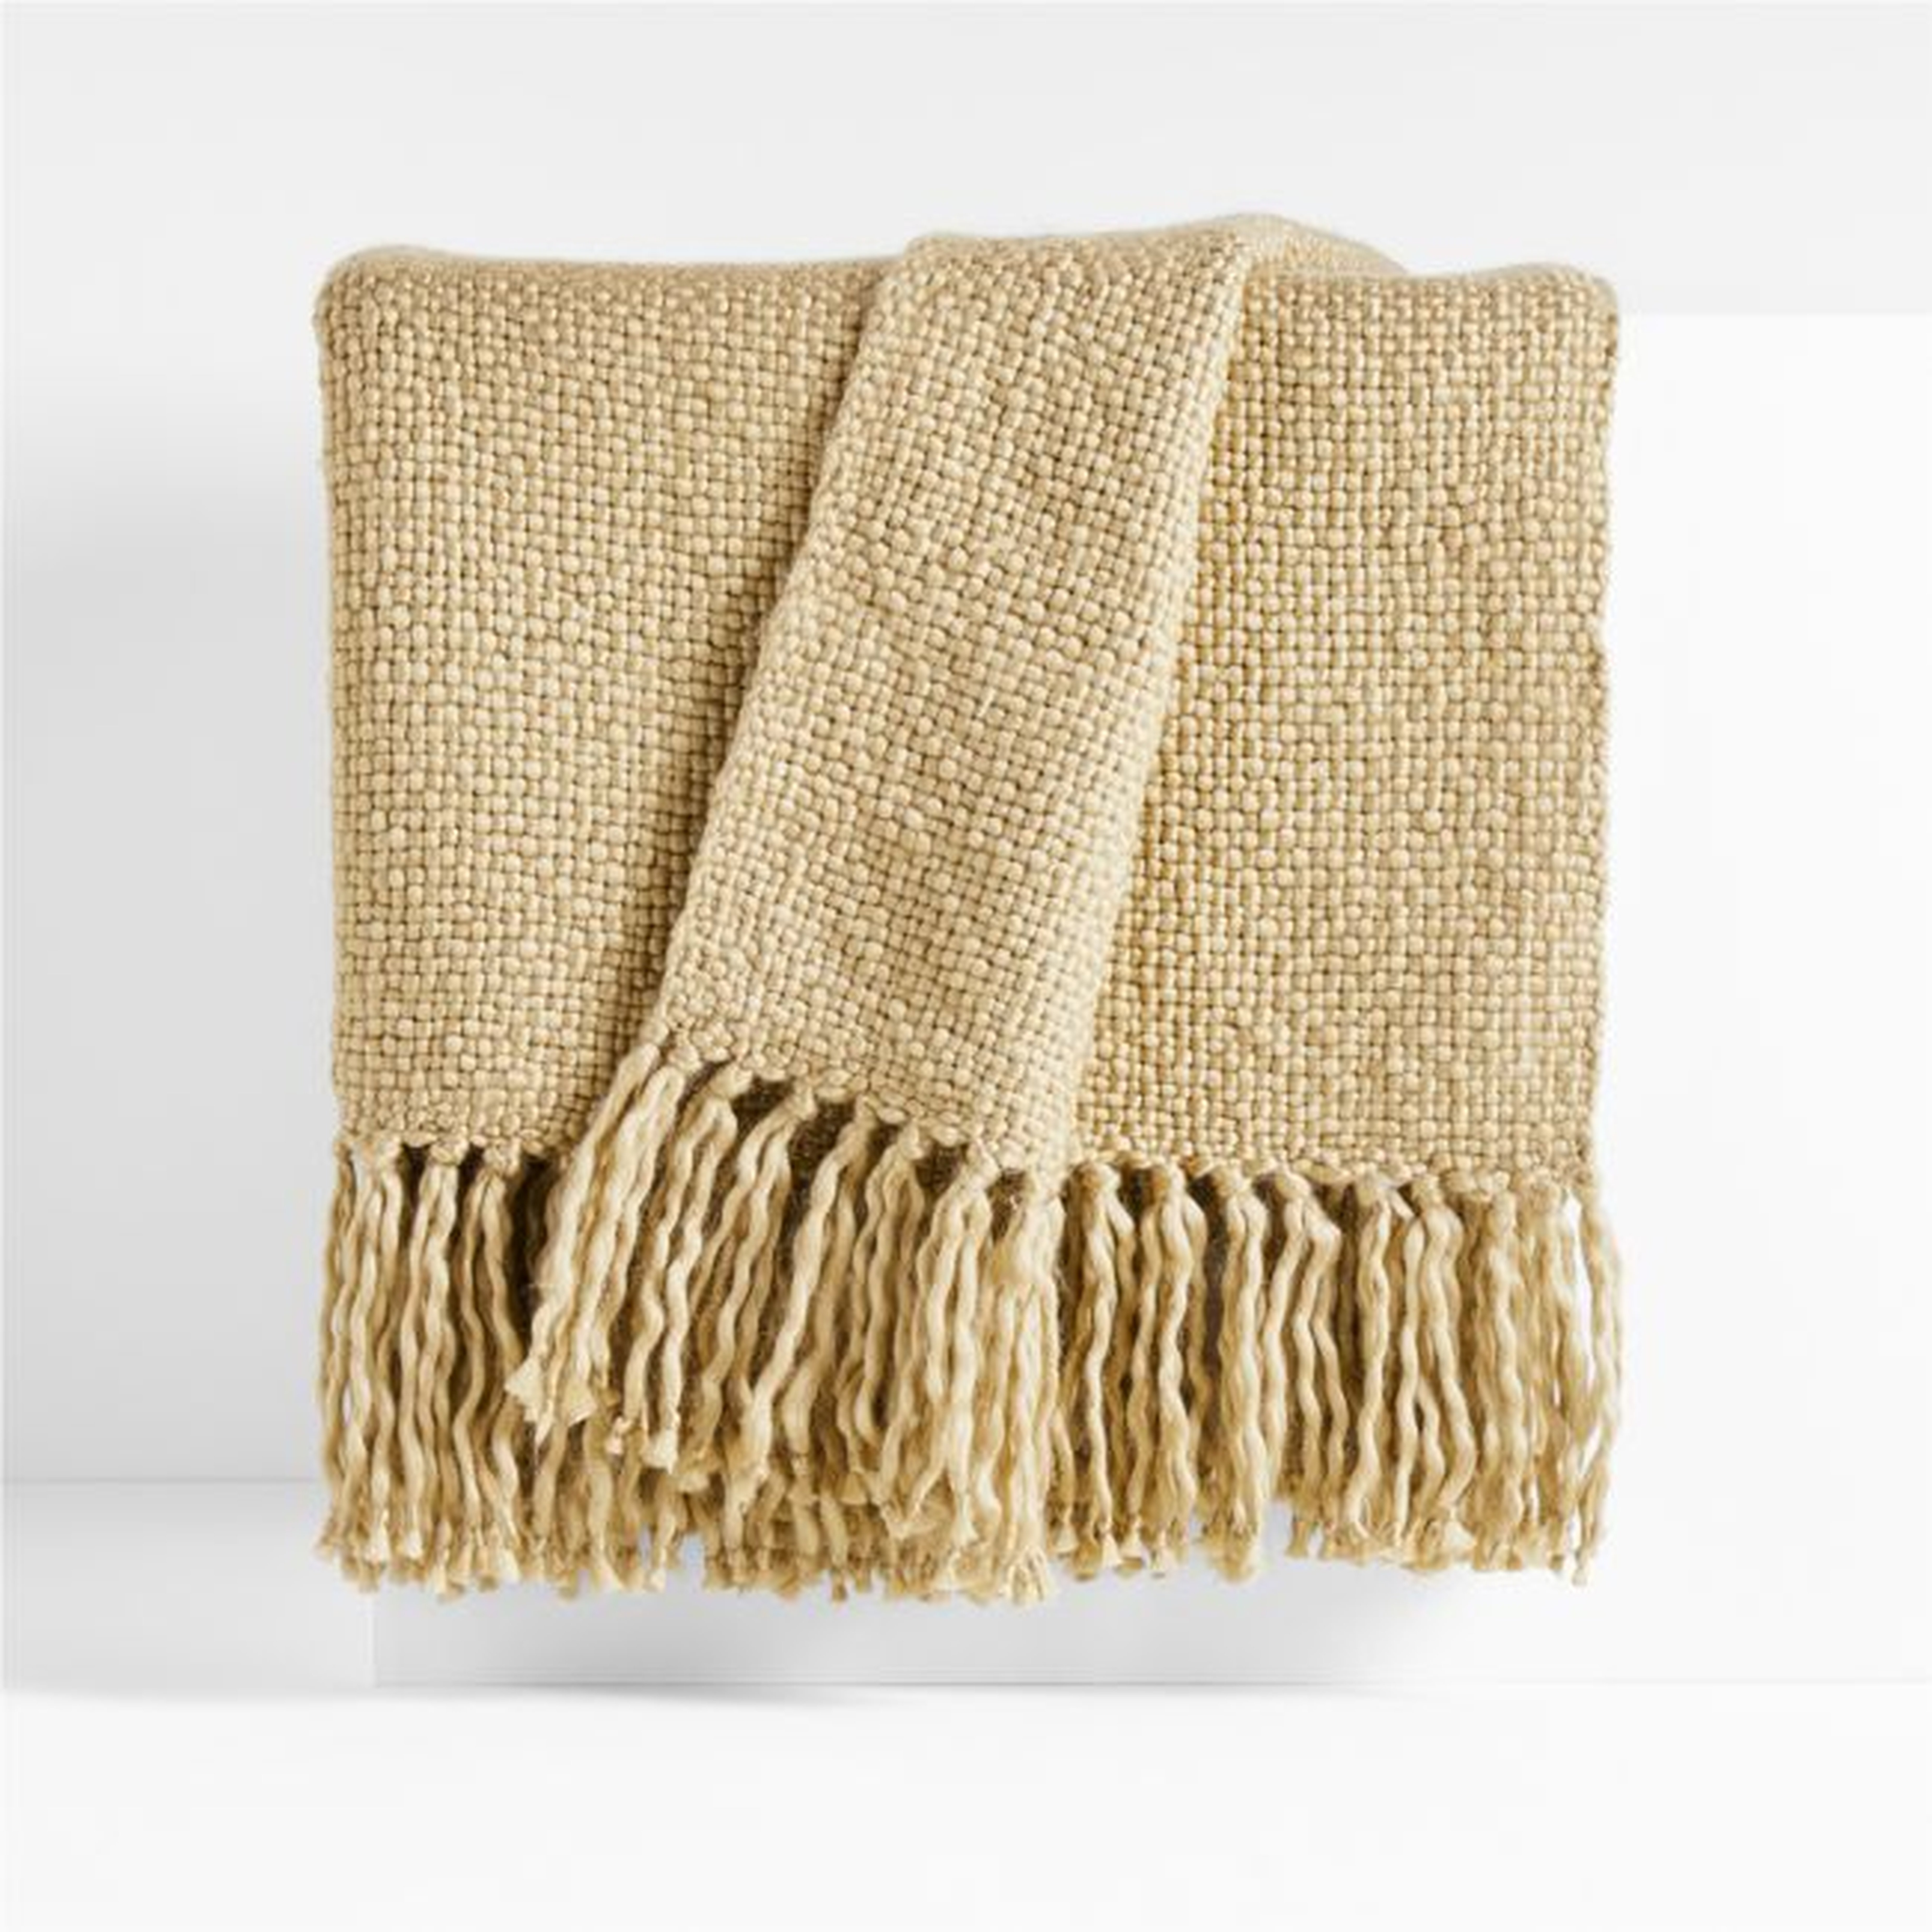 Styles 70"x55" Sand Throw Blanket - Crate and Barrel